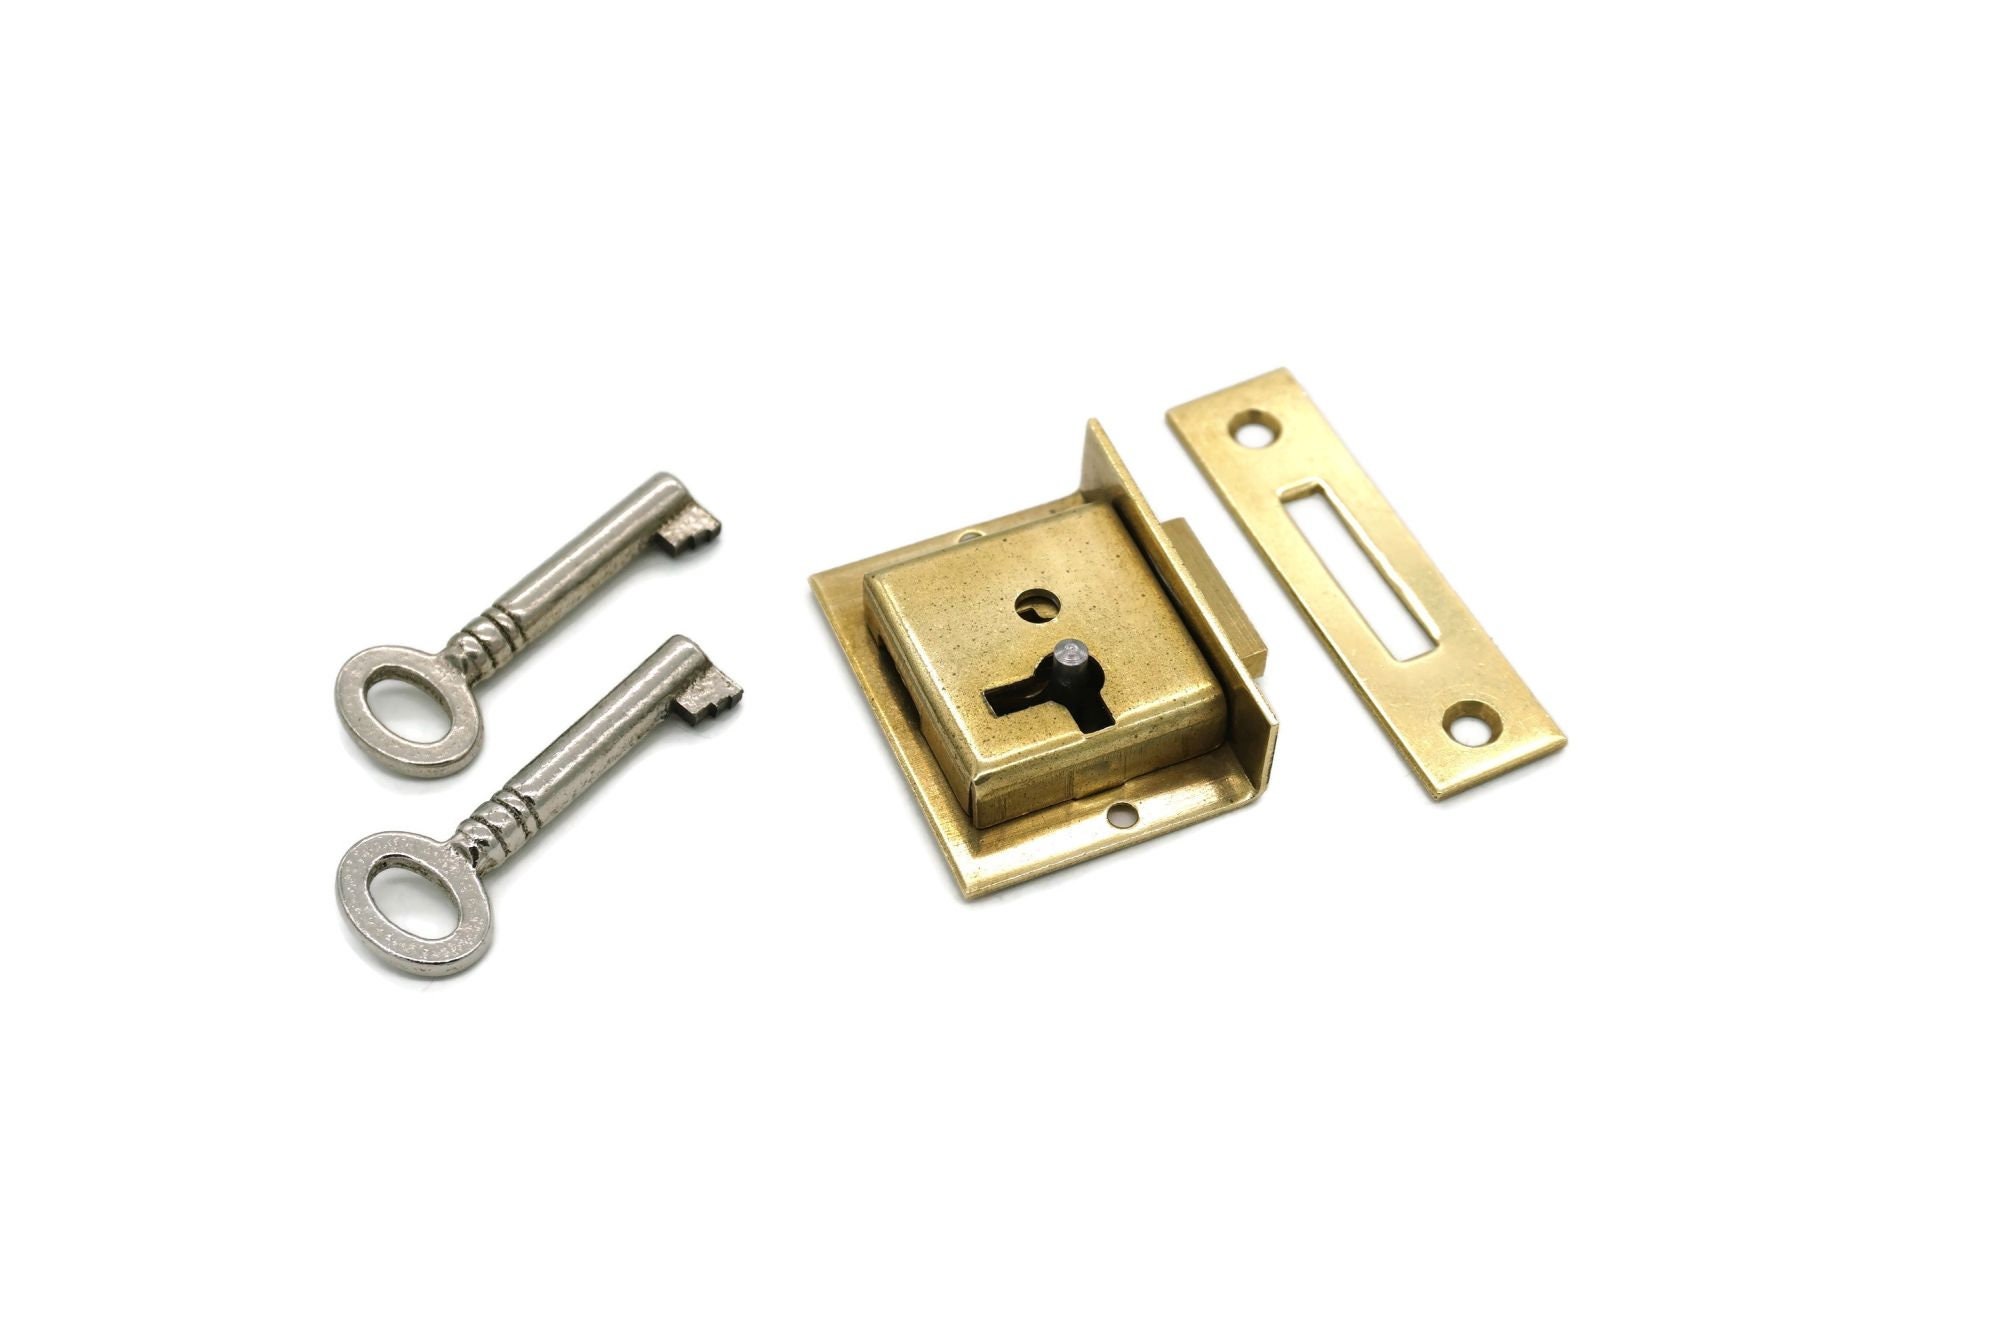 Full Mortise Drop in Style Lock With Key for Furniture Drawer Door Lock 